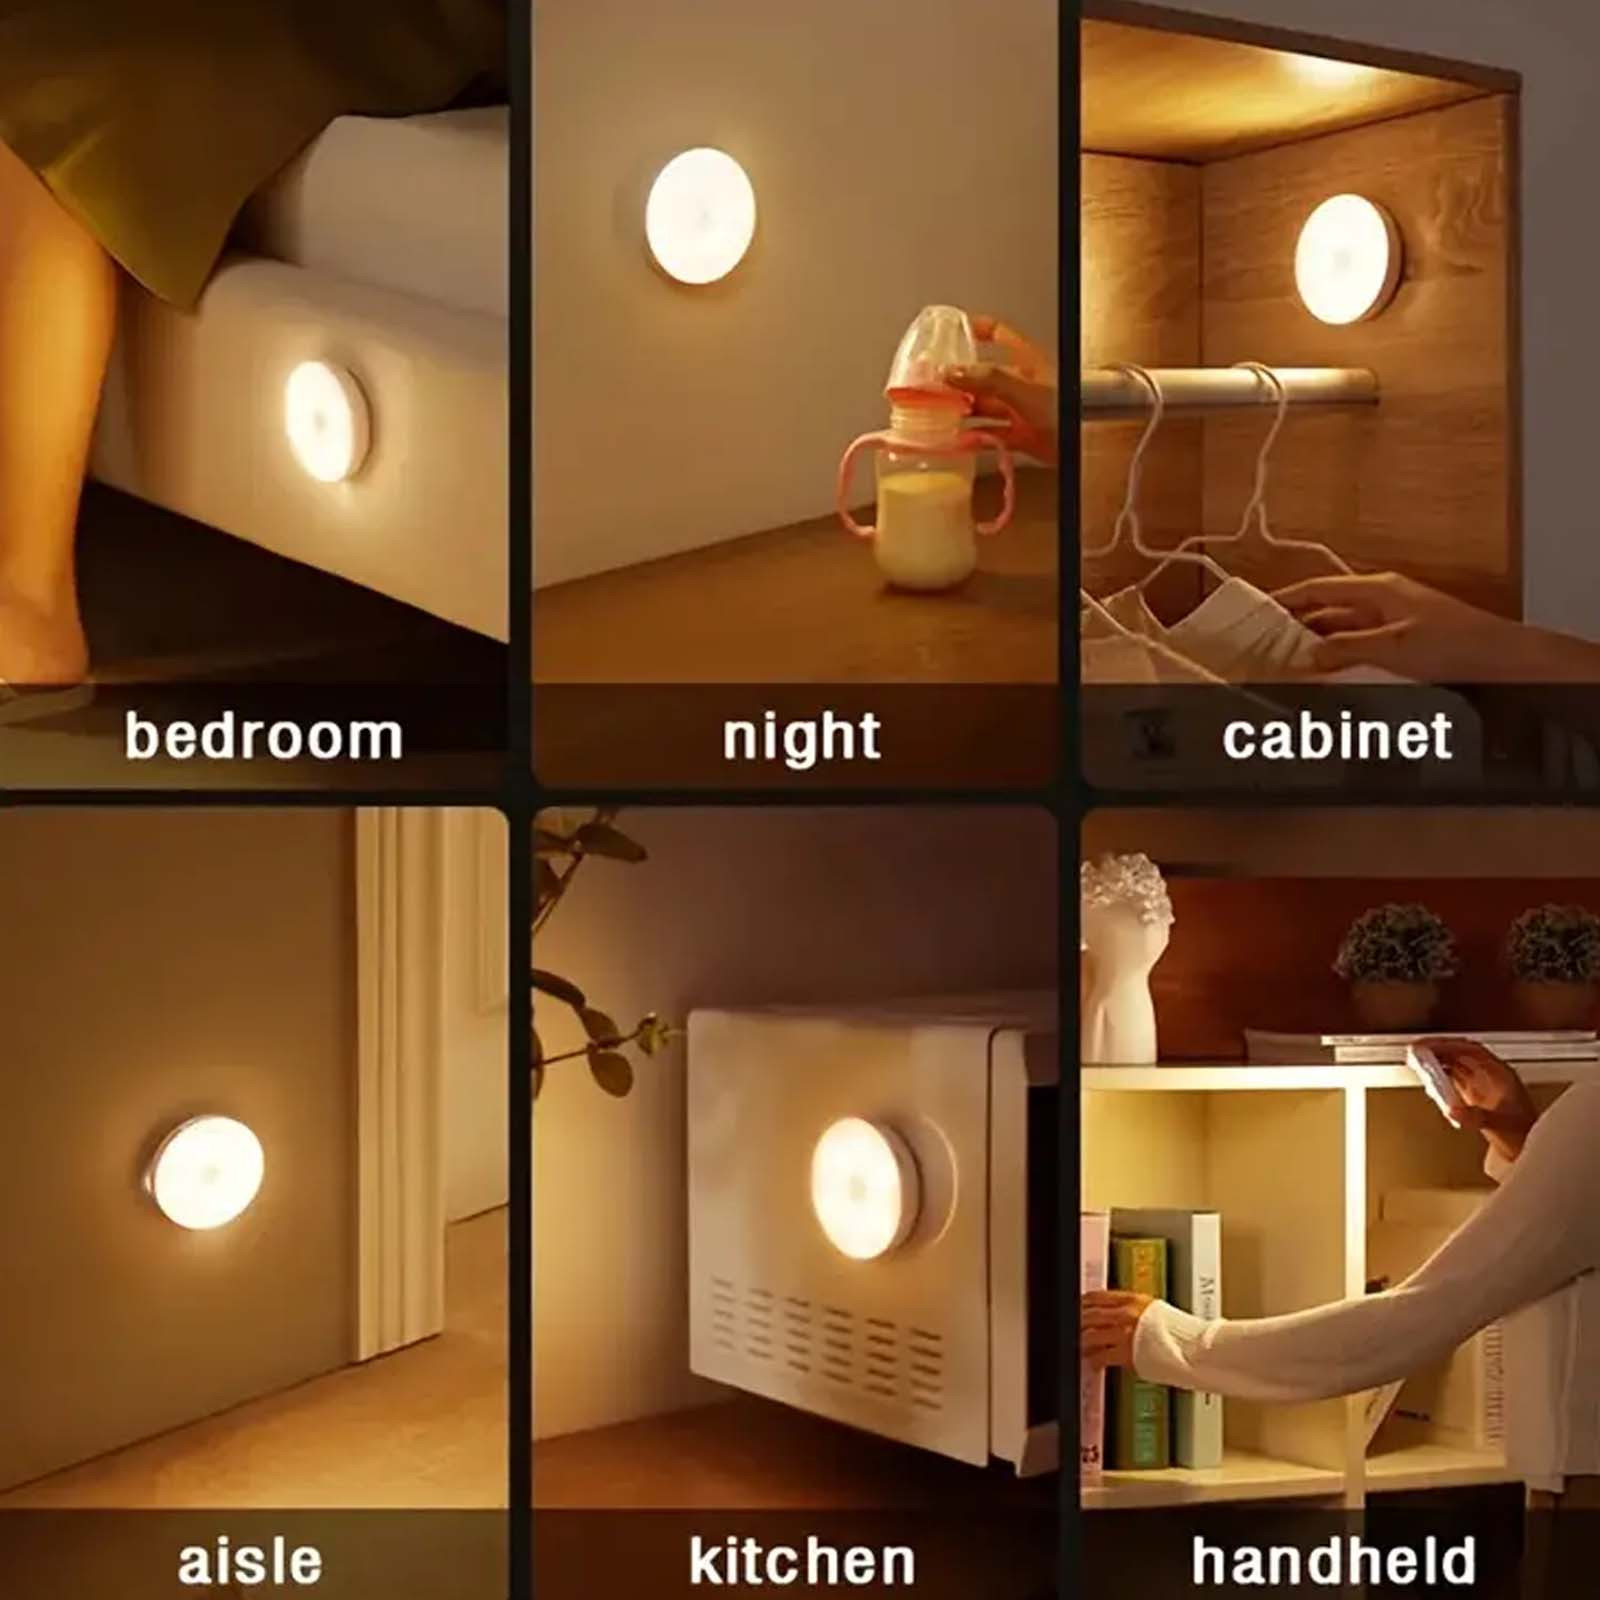 8-LED USB Rechargeable Night Light,Body Induction Lamp,3 Working Modes,Smart Wall Light With Stick-On Magnetic Strip For Homes, Bathroom, Bedroom, Kitchen, Hallways, Cars, Garages And Corridor Decor details 4